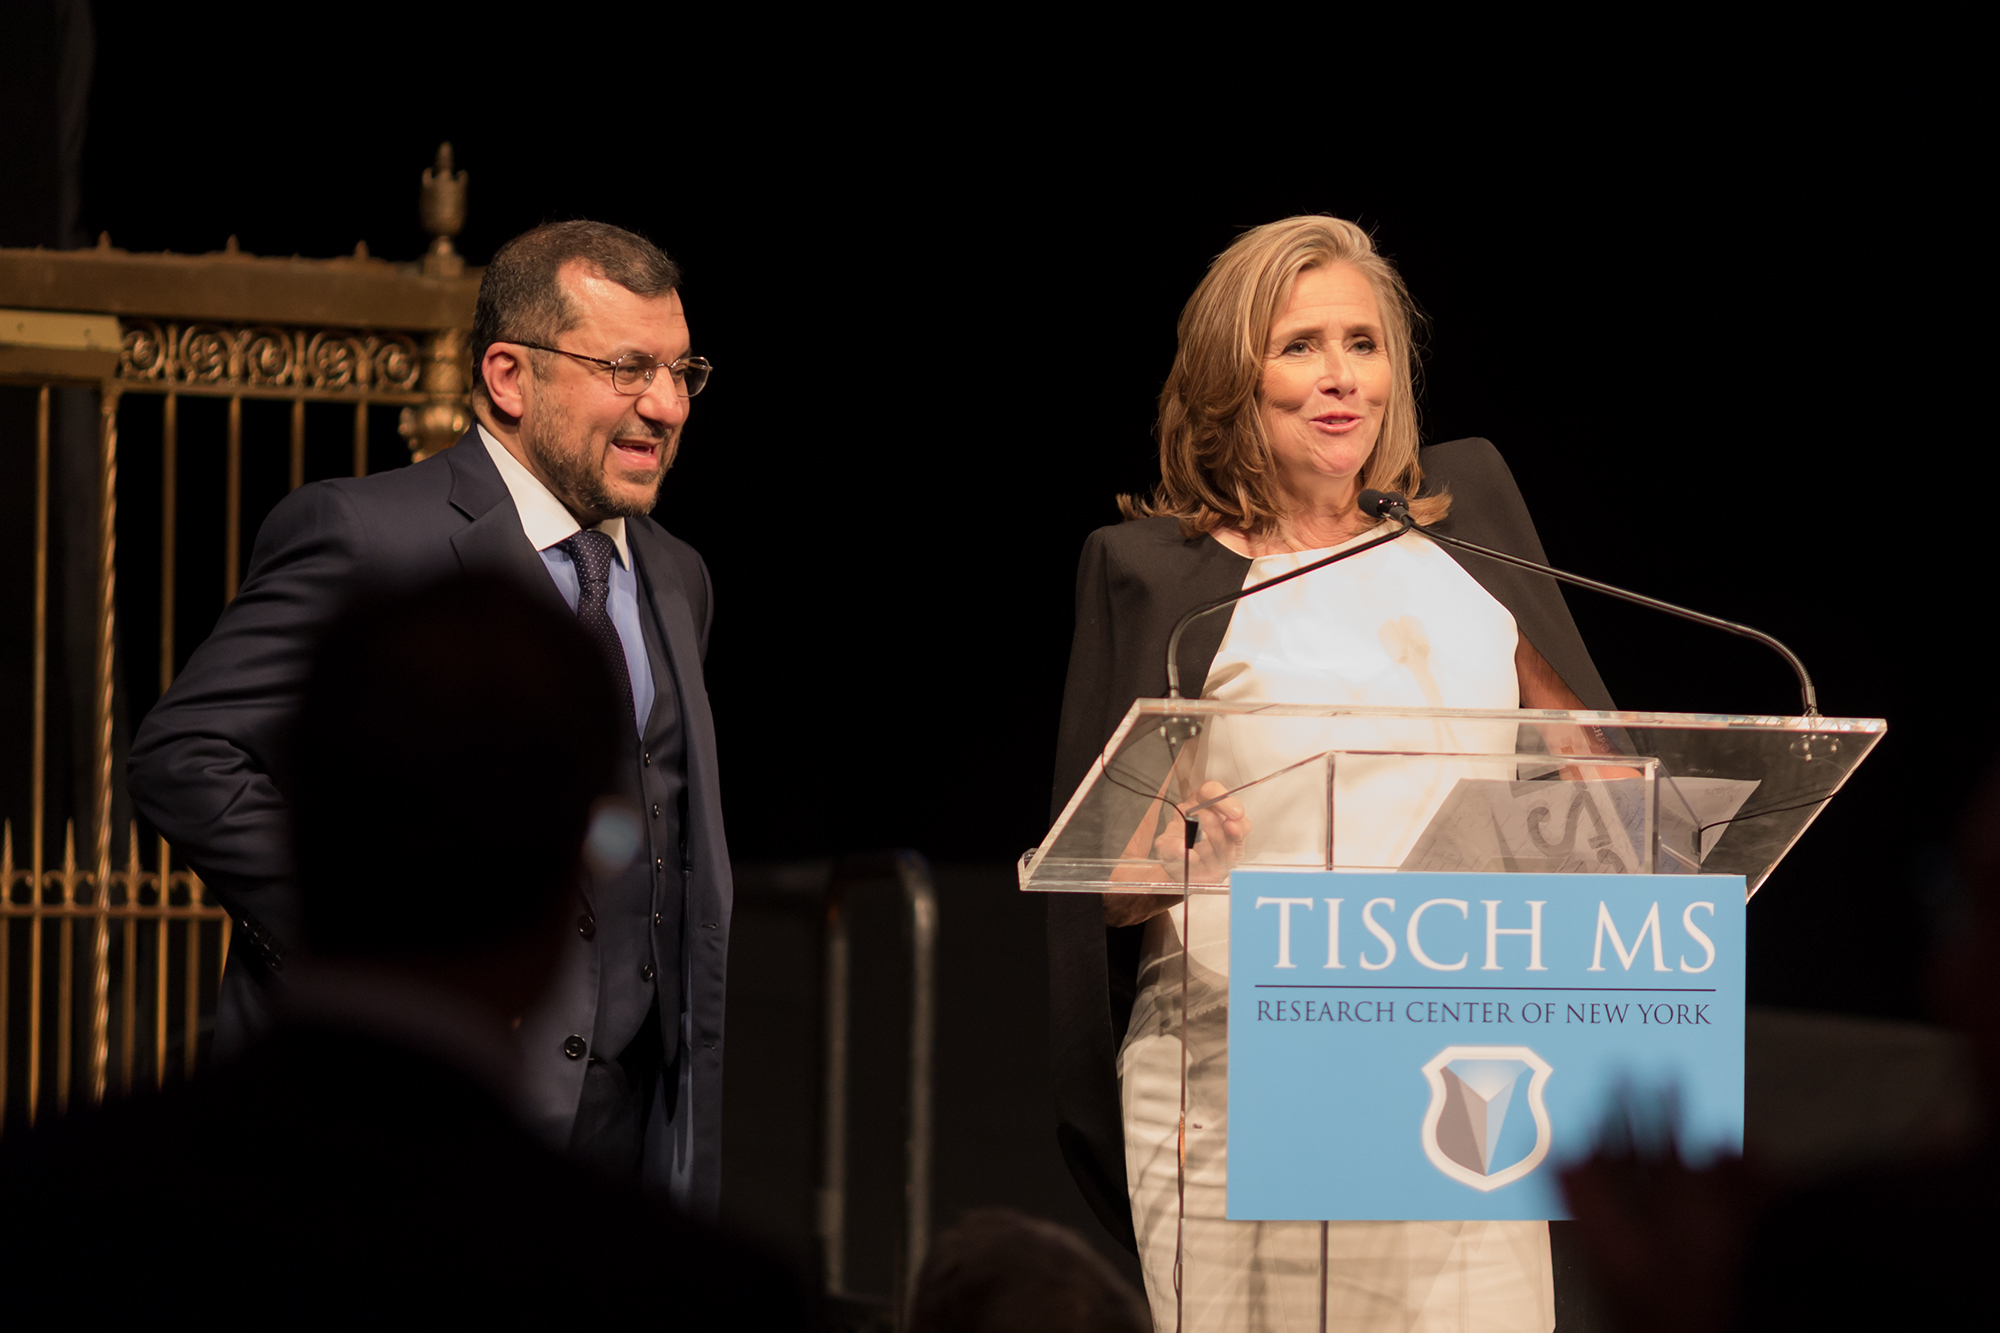 Meredith Vieira Welcomes Guests to the 2018 Future Without MS Gala